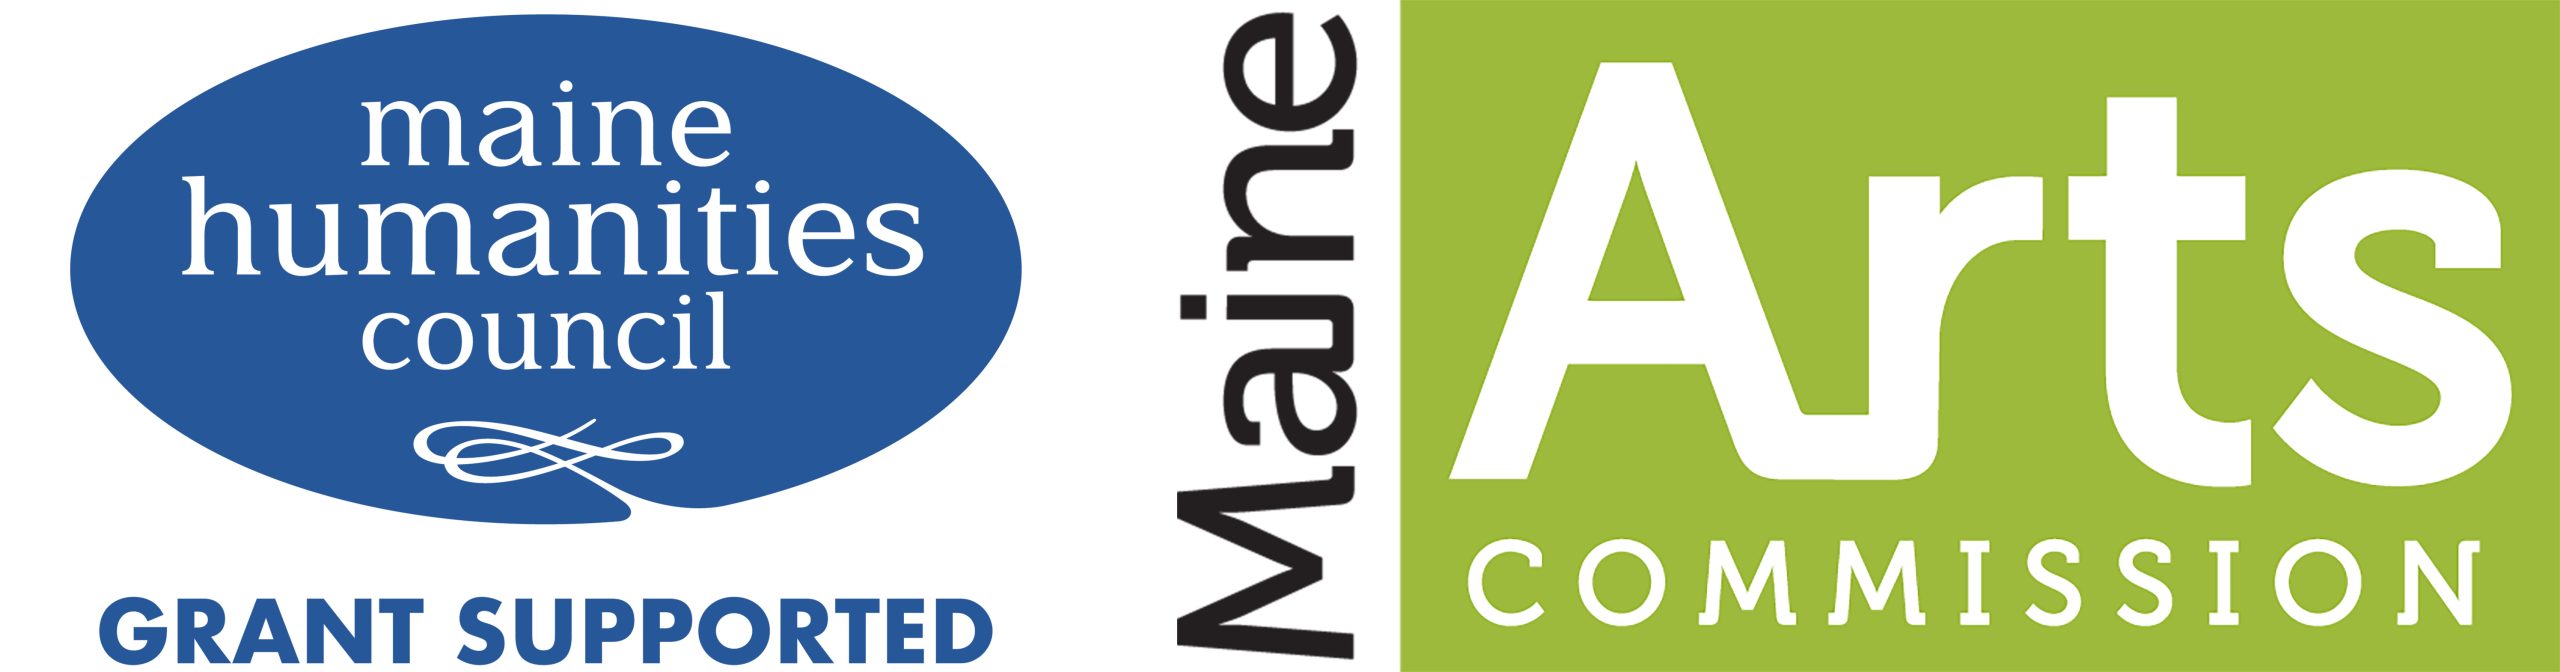 An image of a blue logo that reads "Maine Humanities Council" and a green logo that reads "Maine Arts Commission."